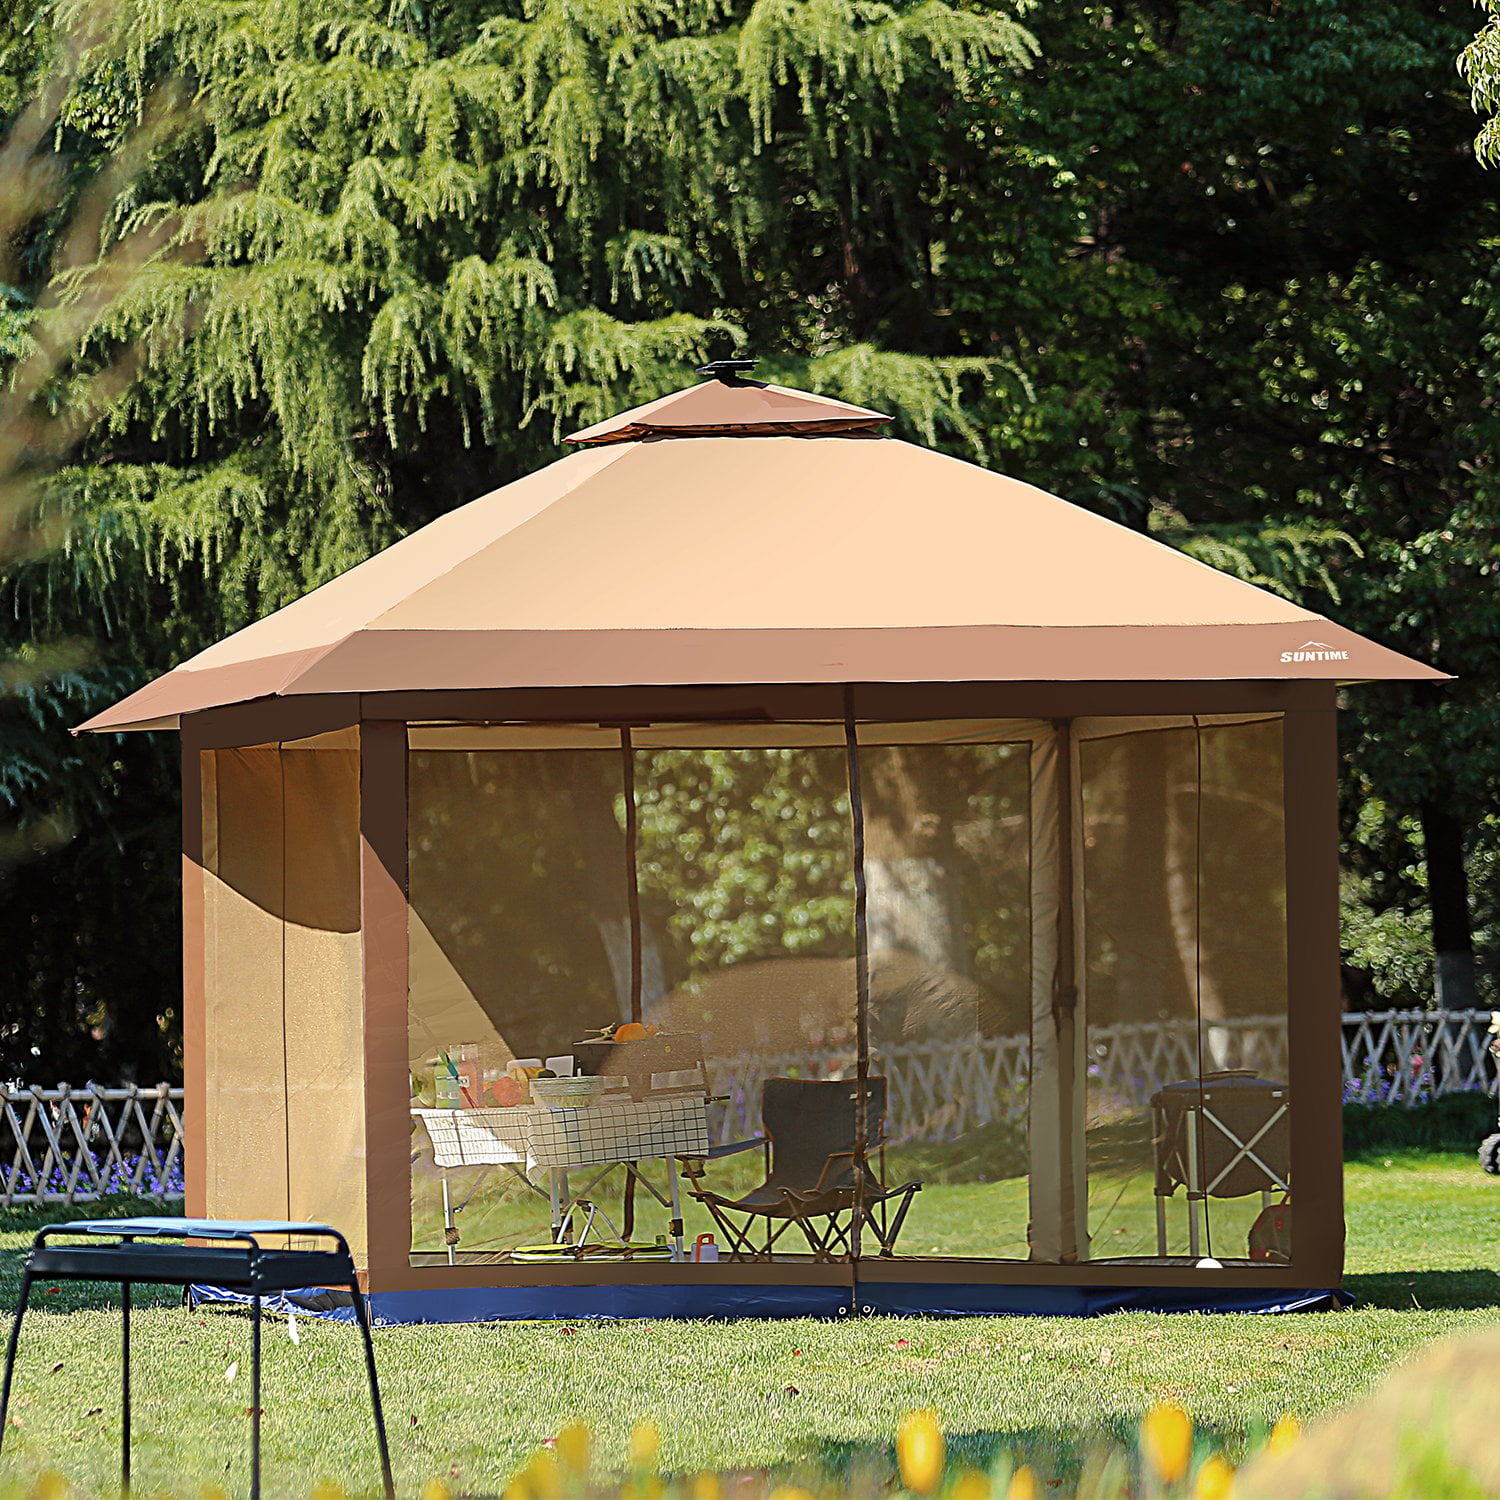 Suntime Outdoor  Pop Up Gazebo  Canopy  with Mosquito Netting 